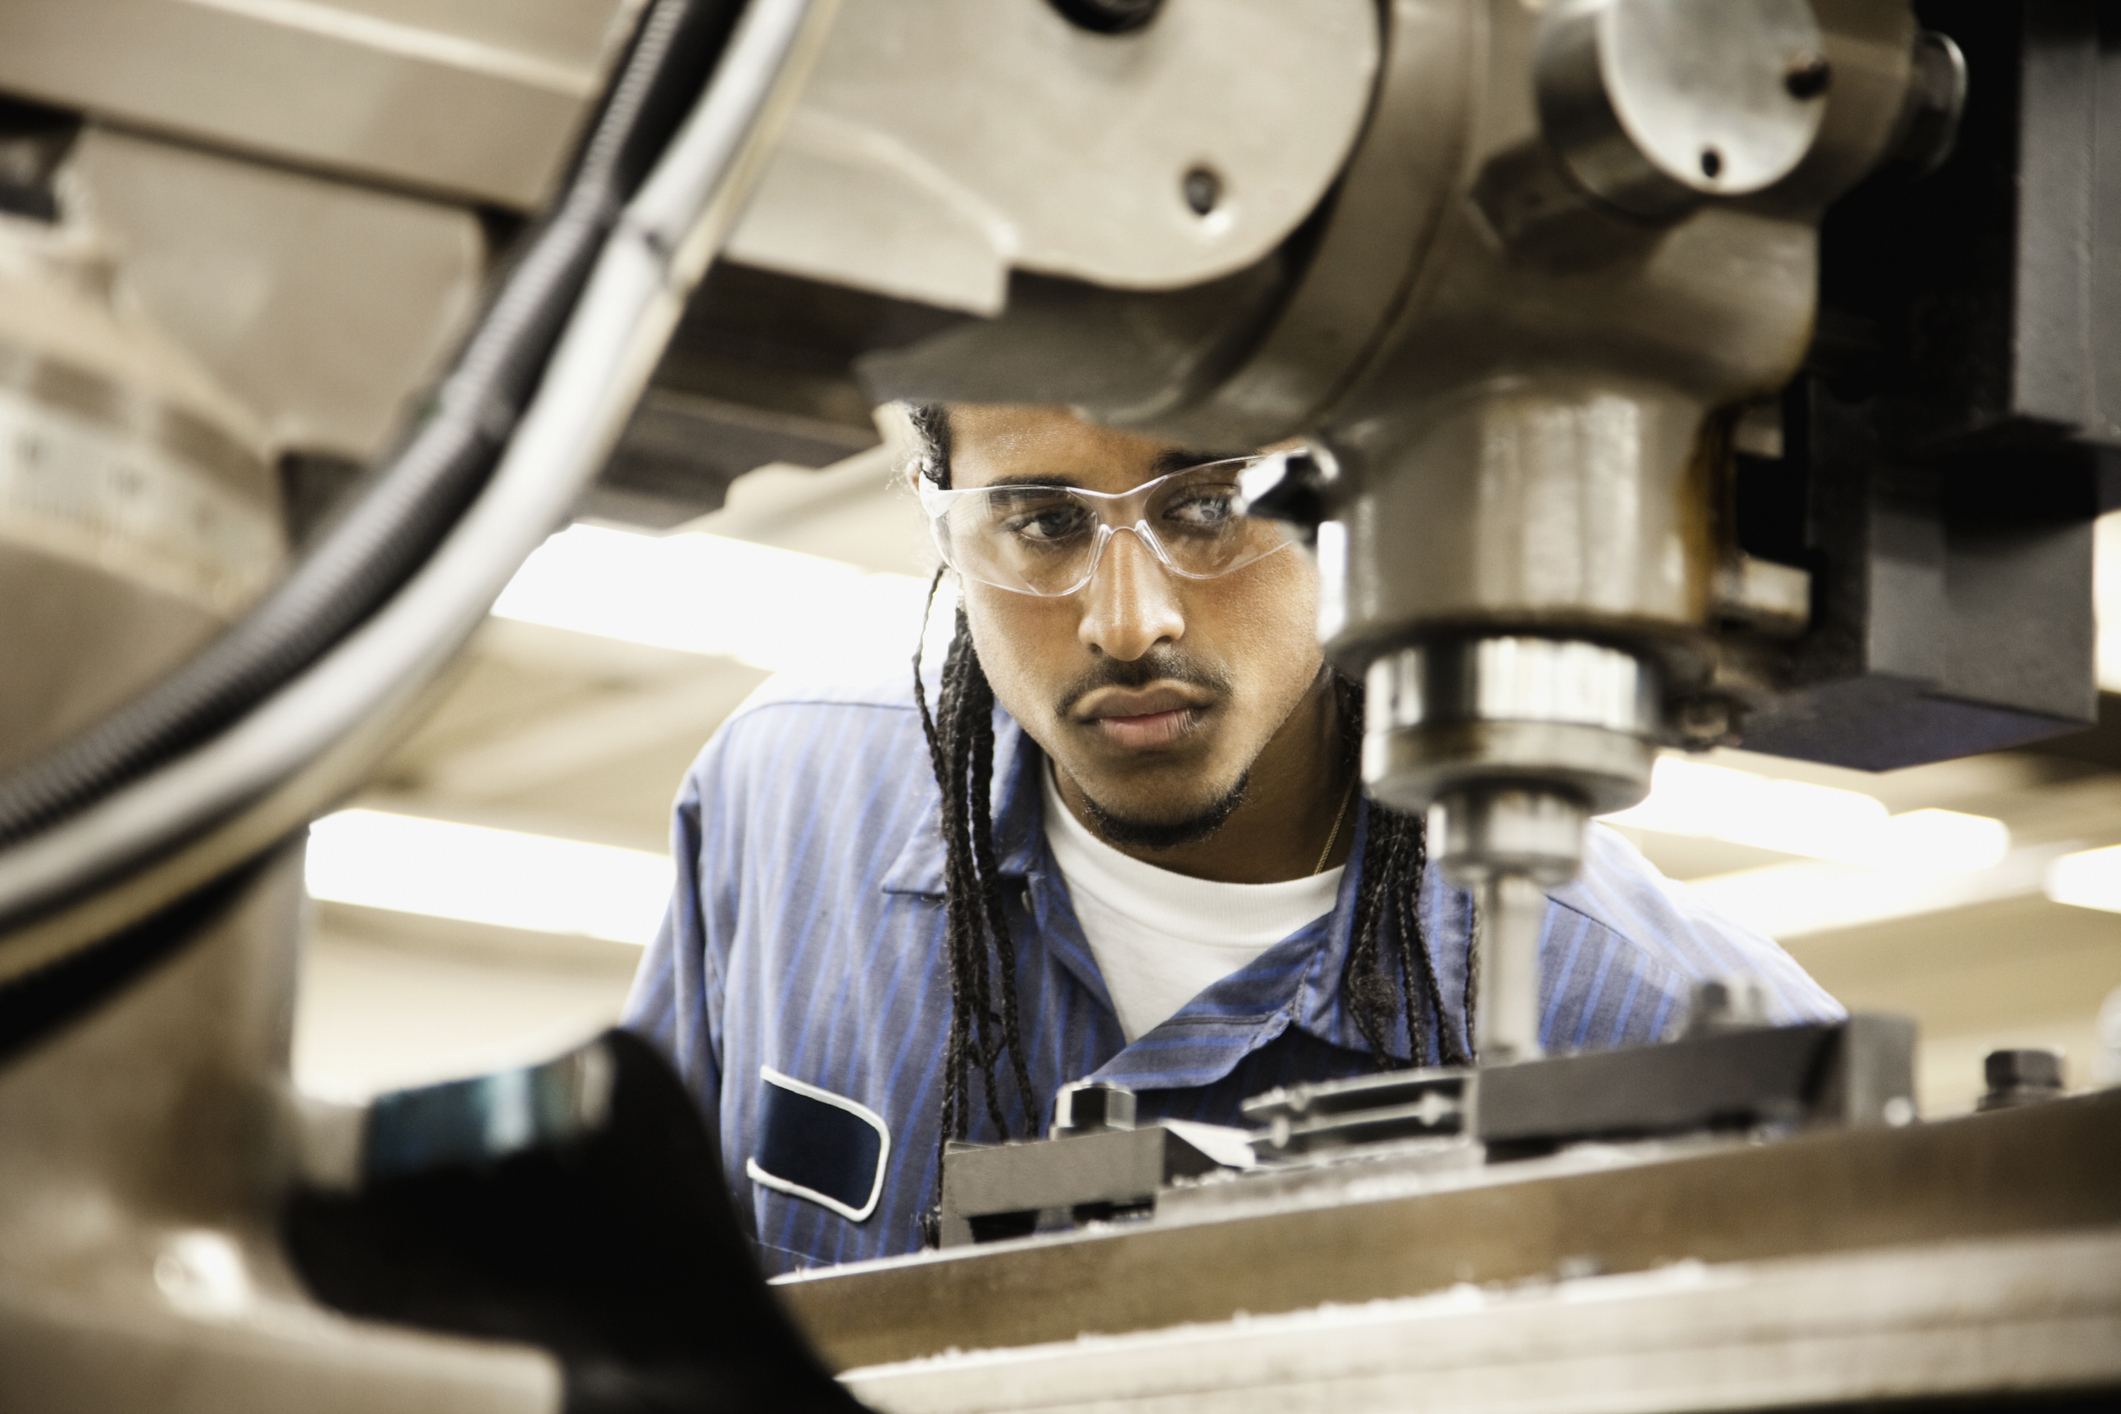 A man is wearing goggles and operating machinery